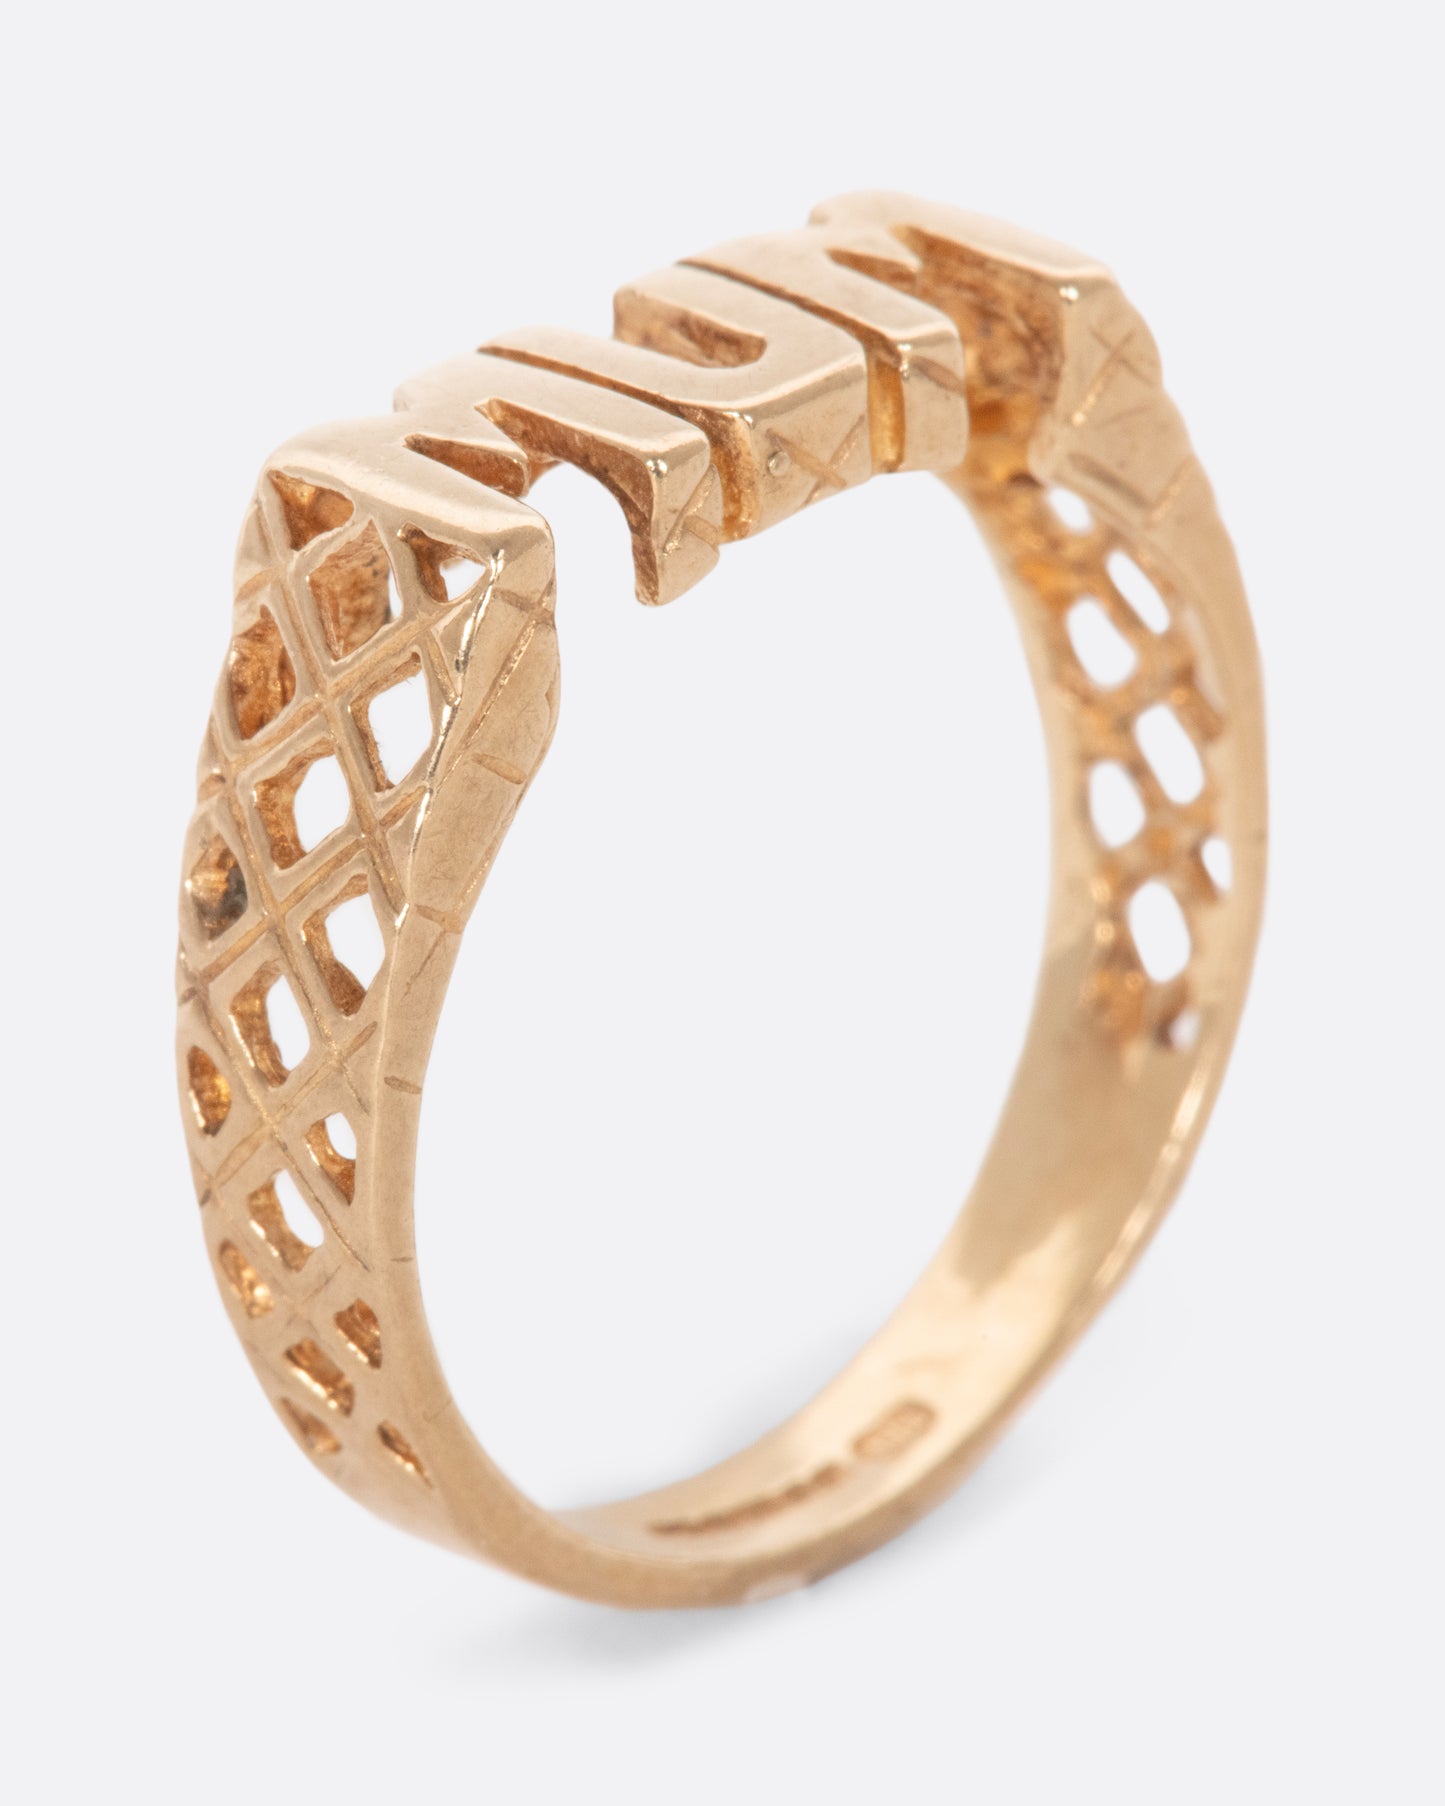 Gold ring that reads 'MUM' with crosshatch retail on either side. View from the side.